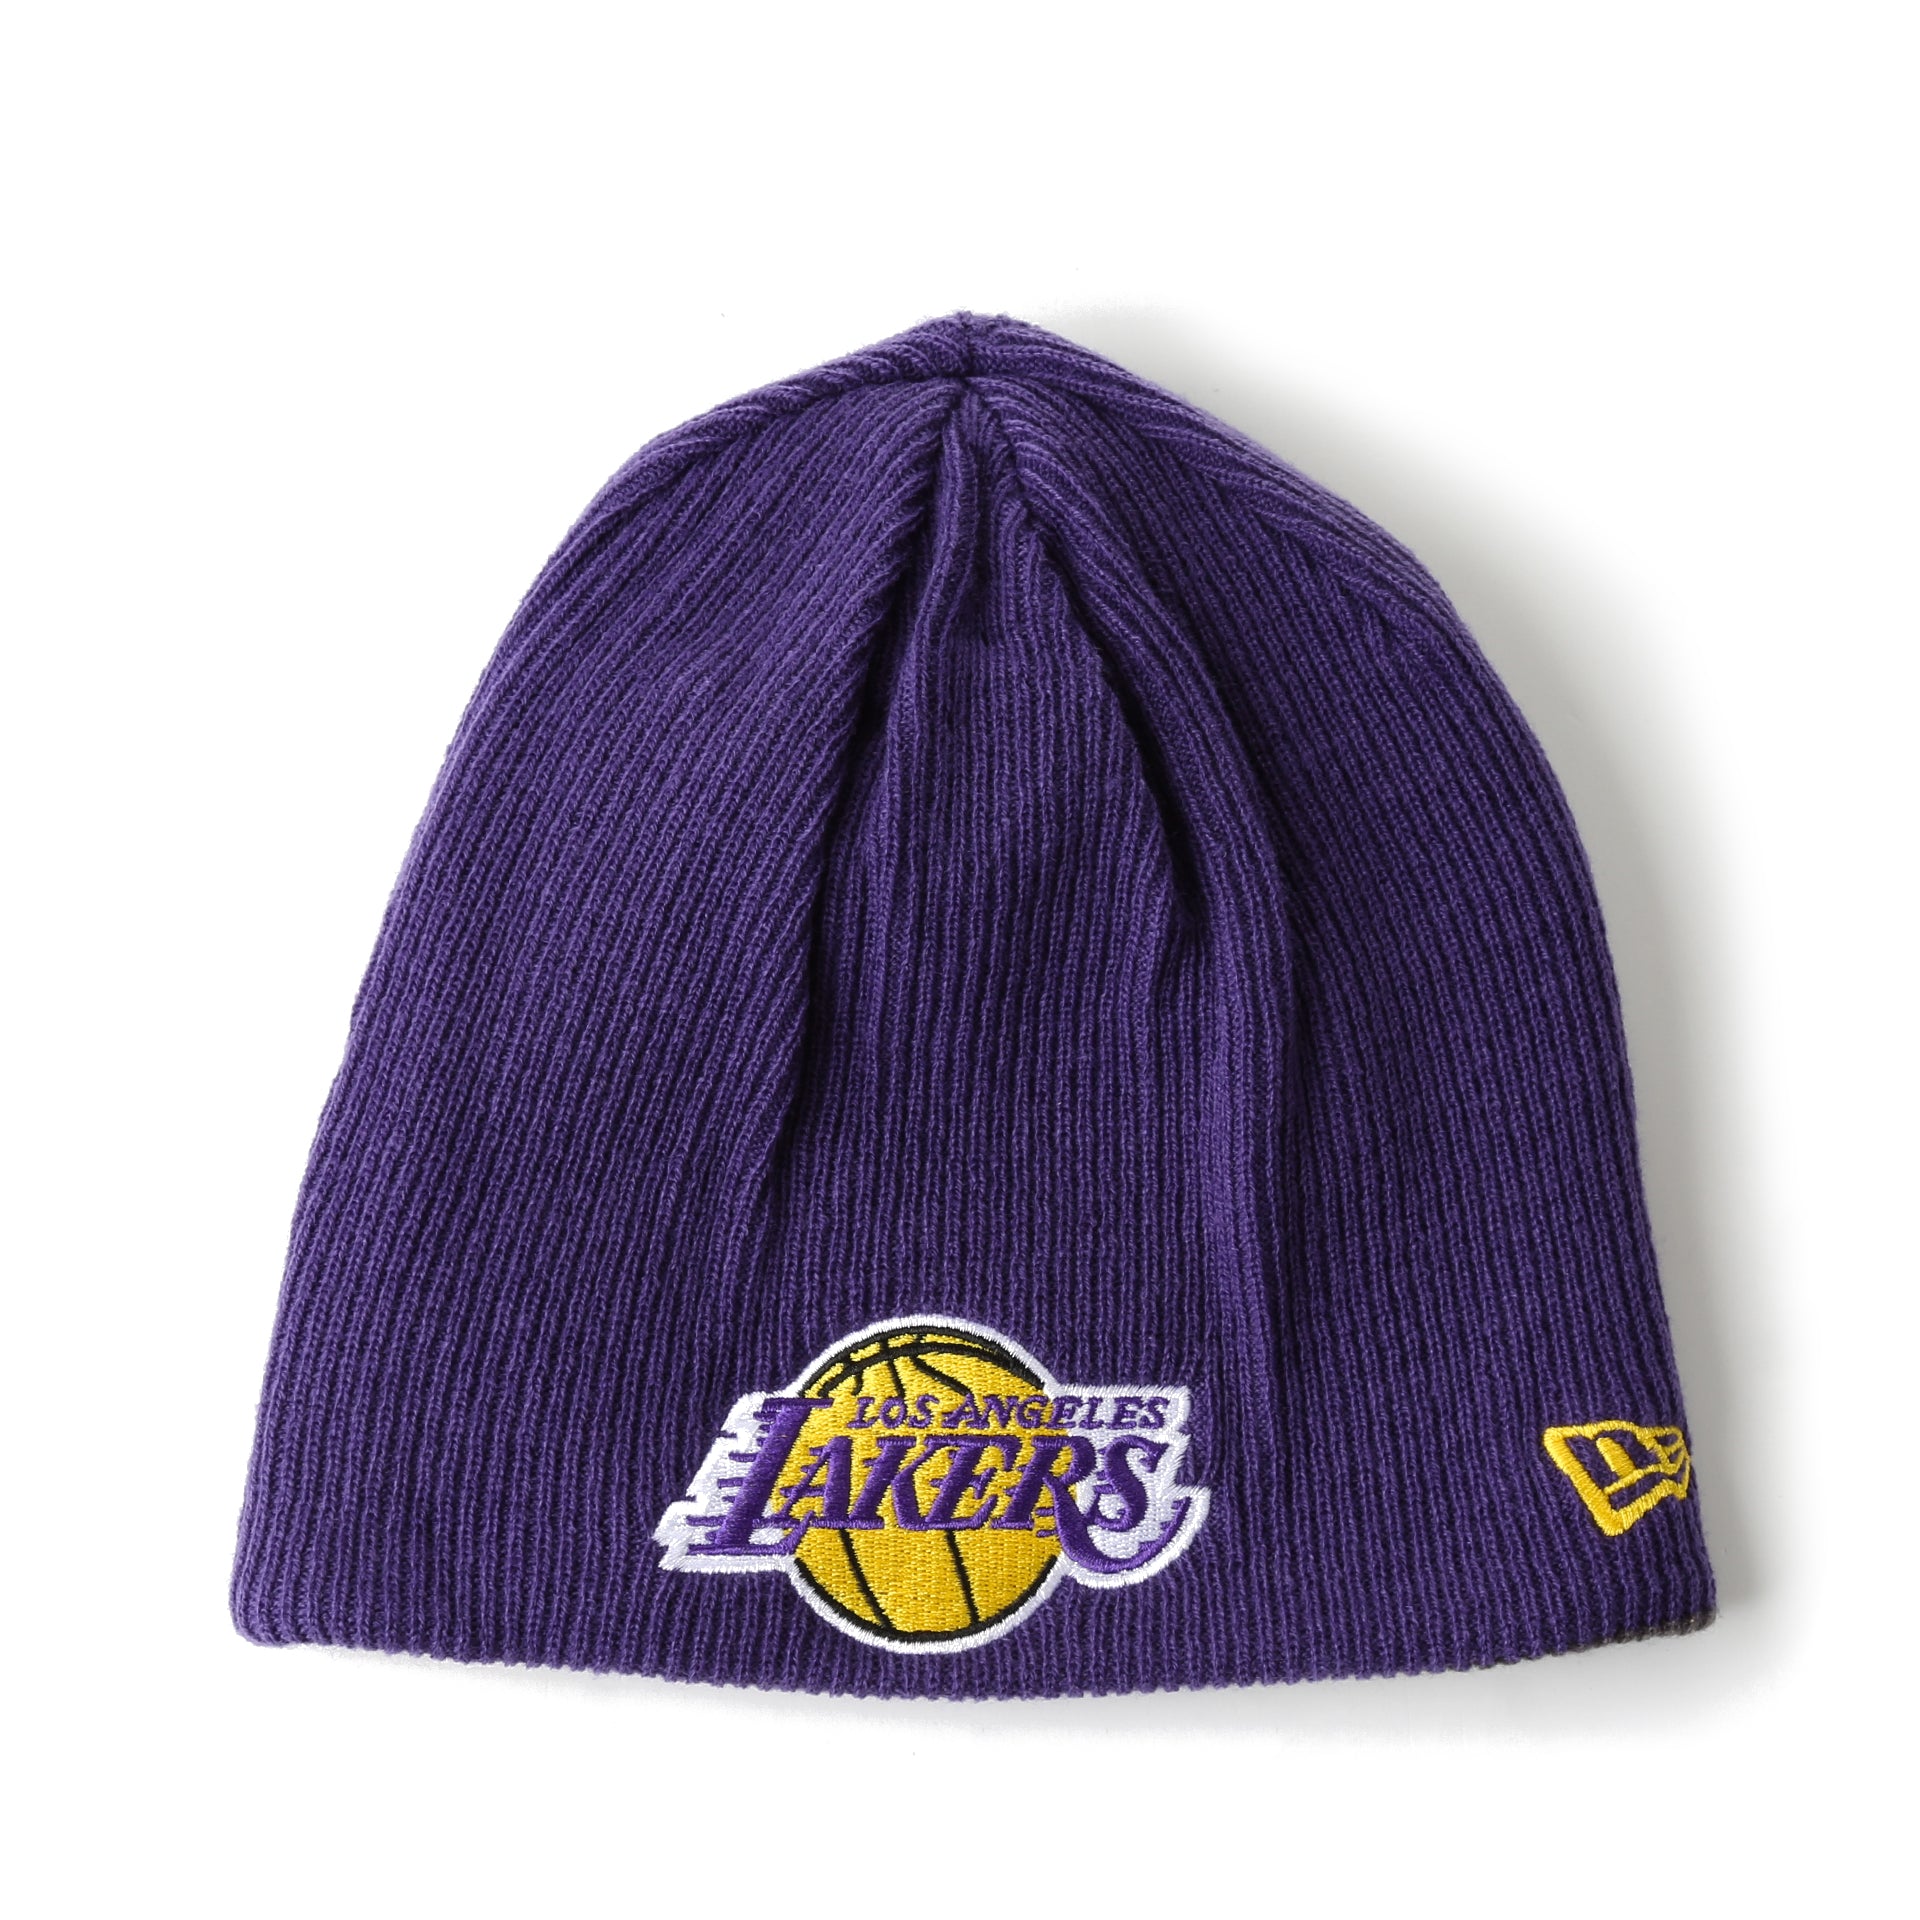 Buy the beanie Los Angeles Lakers by New Era